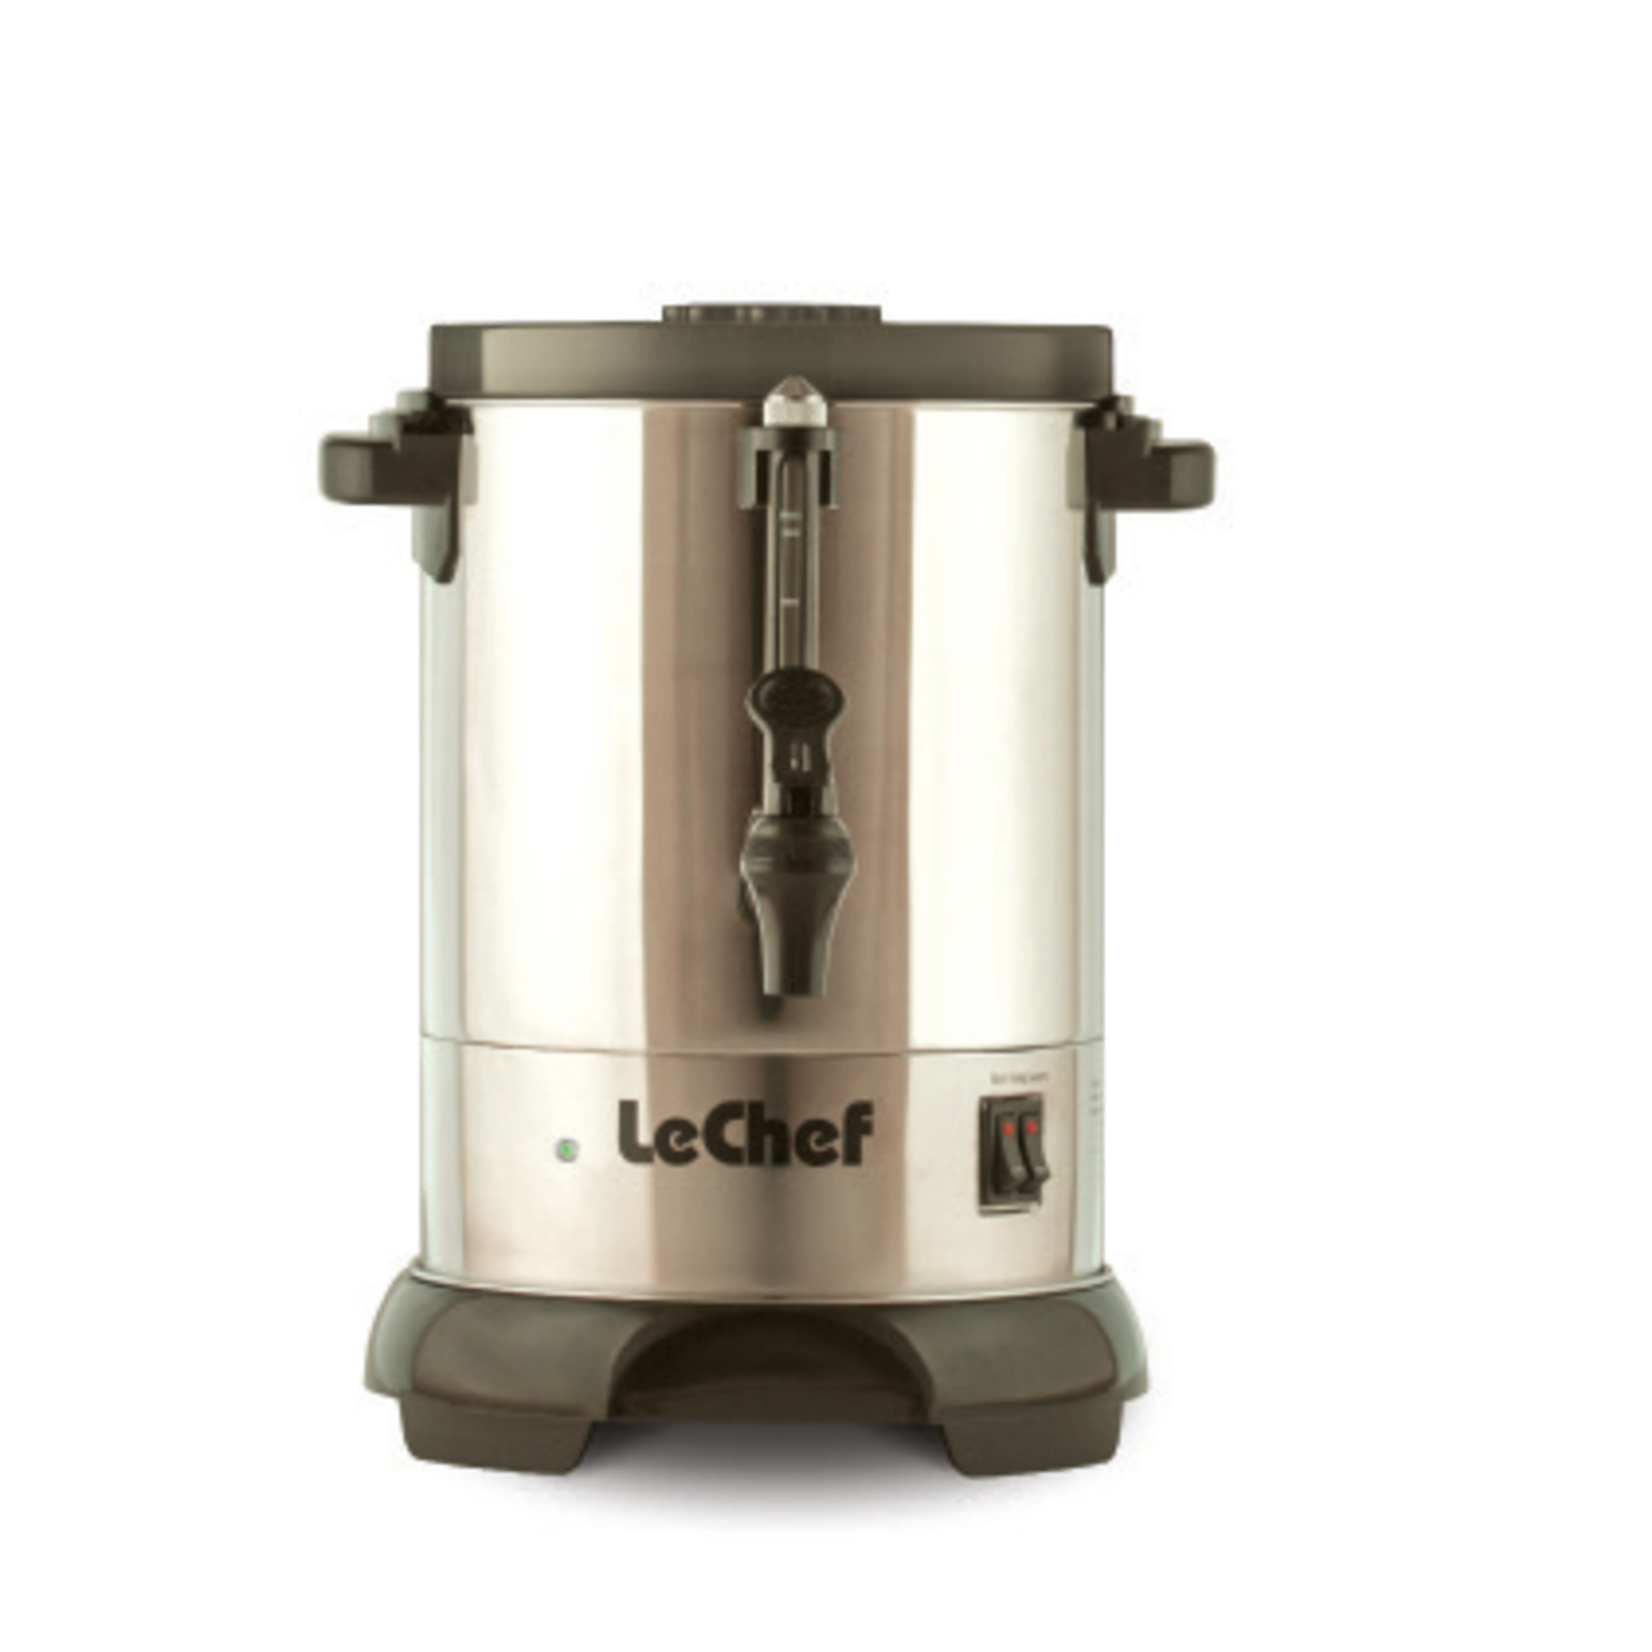 TWS LeChef Hot Water Urn S/S 30 CUP, 6L W/ SHABBOS SWITCH